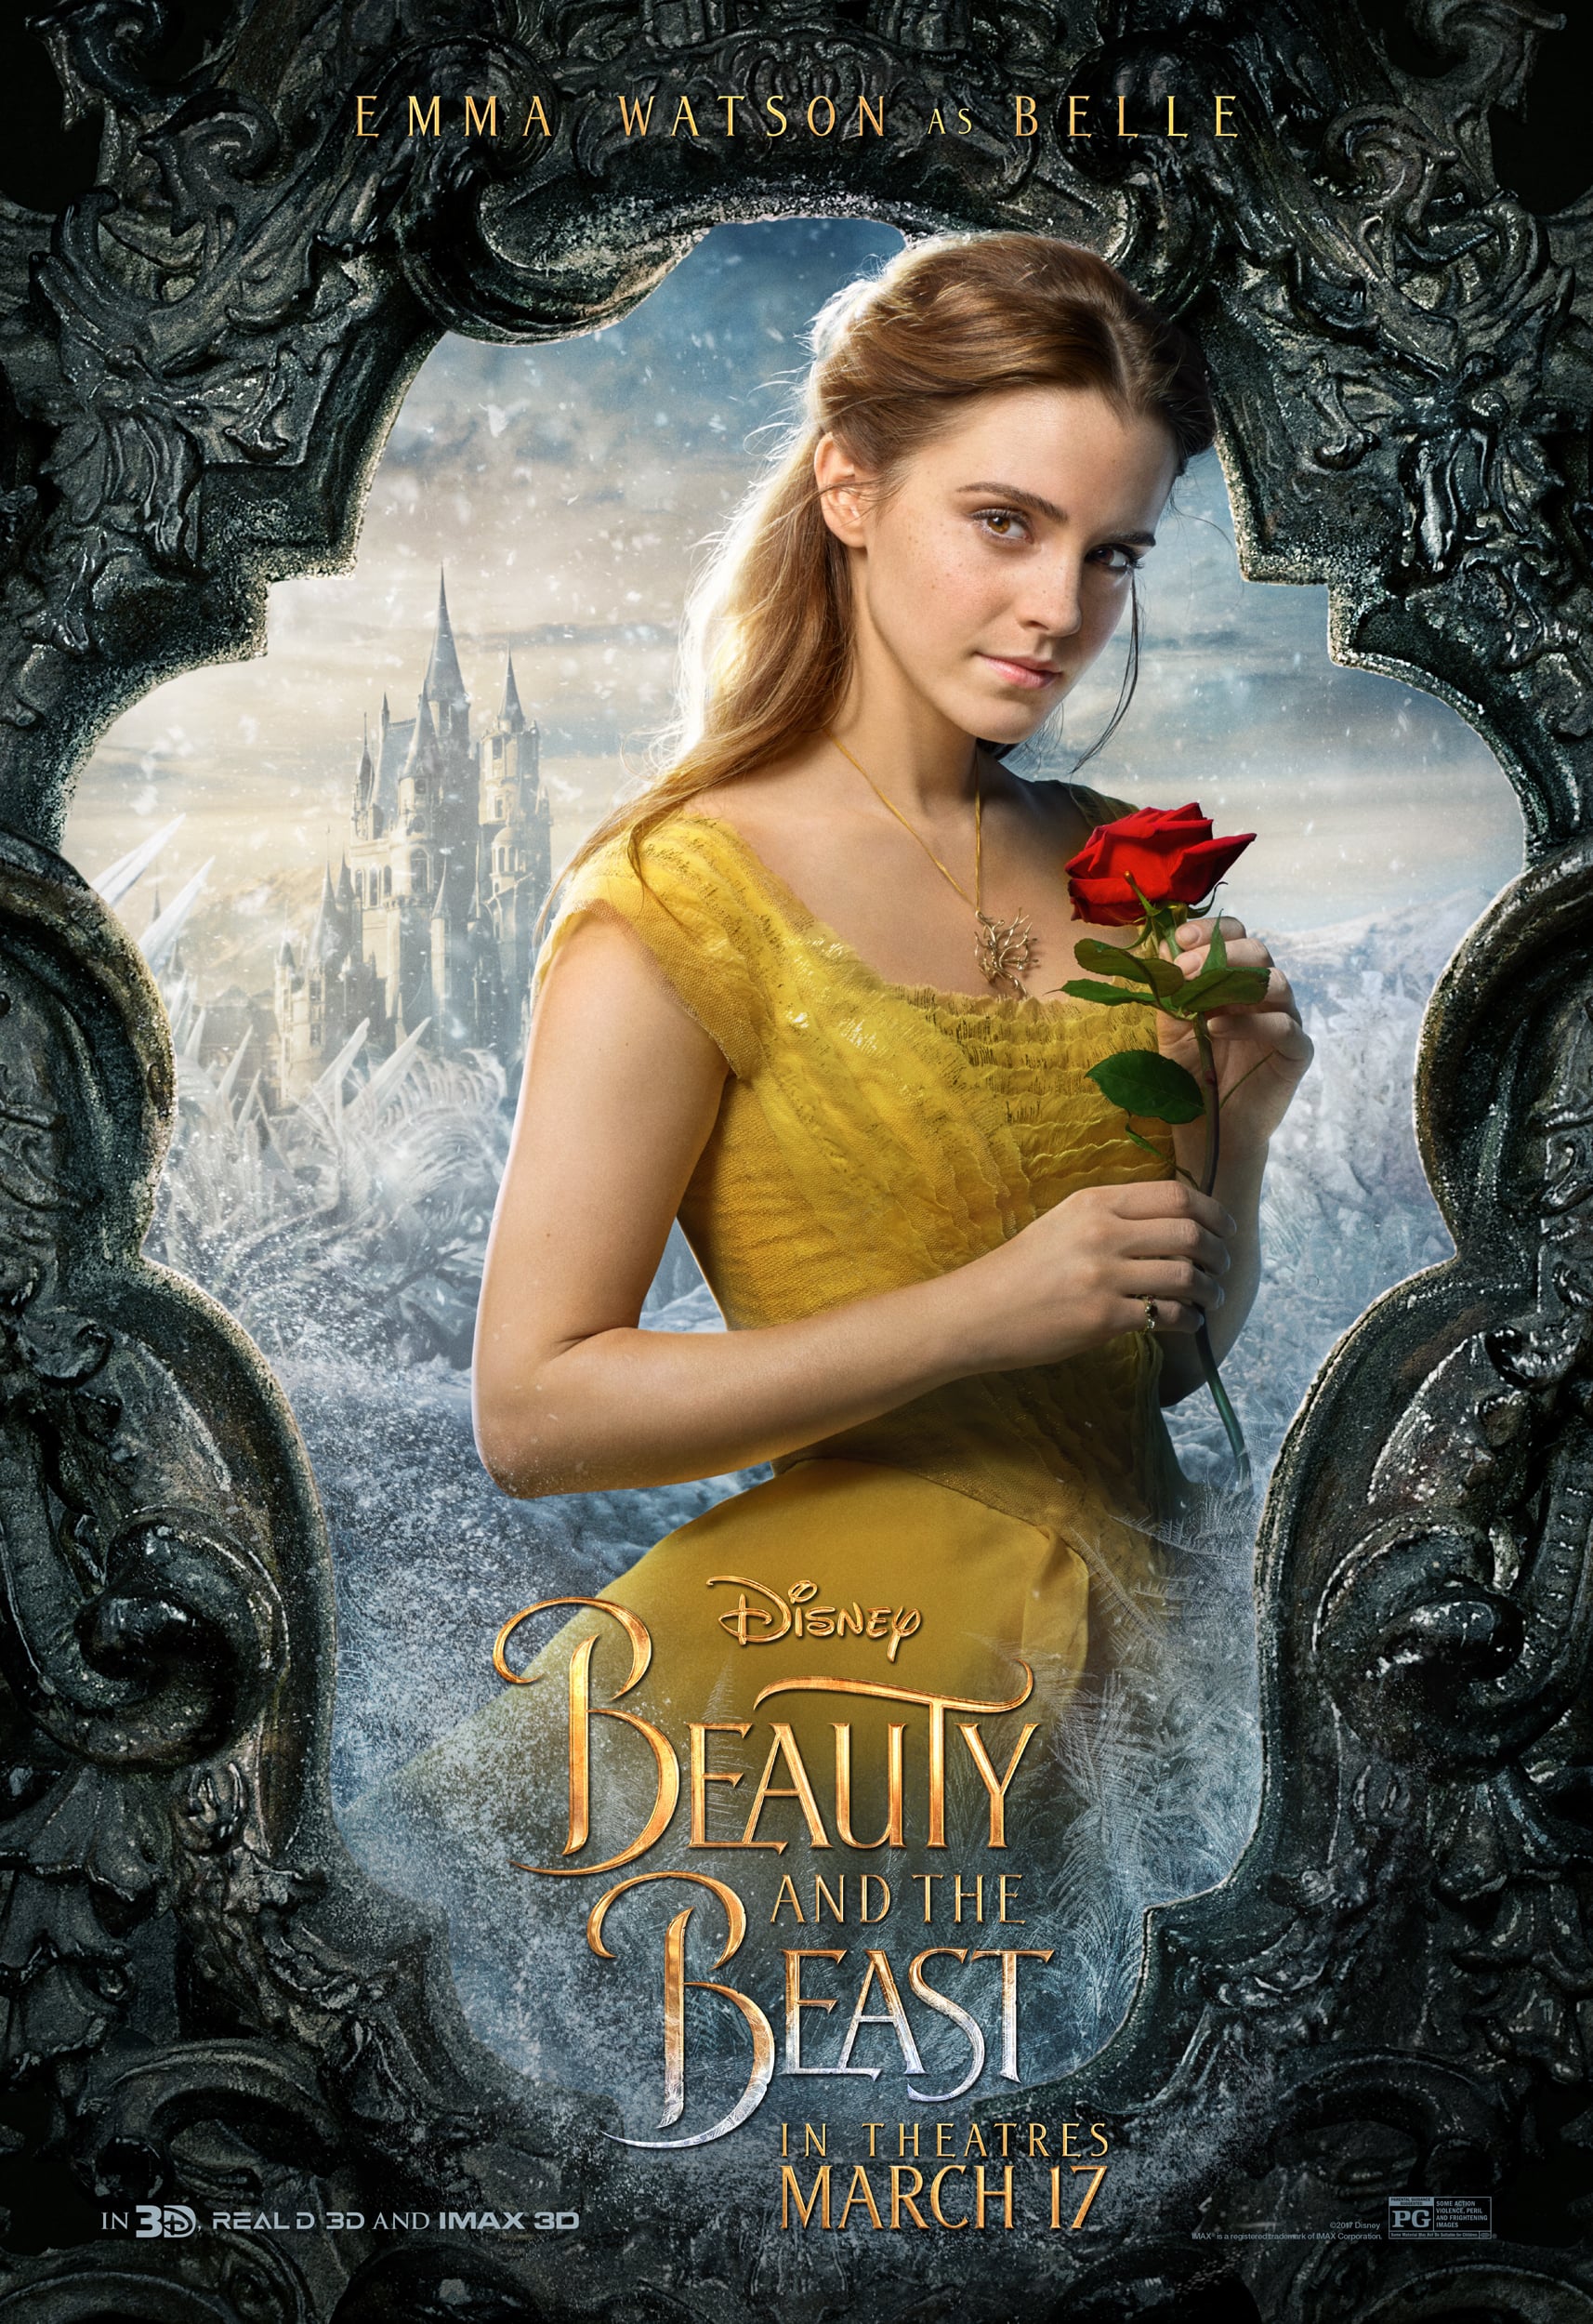 beauty and the beast 2017 full movie watch online free